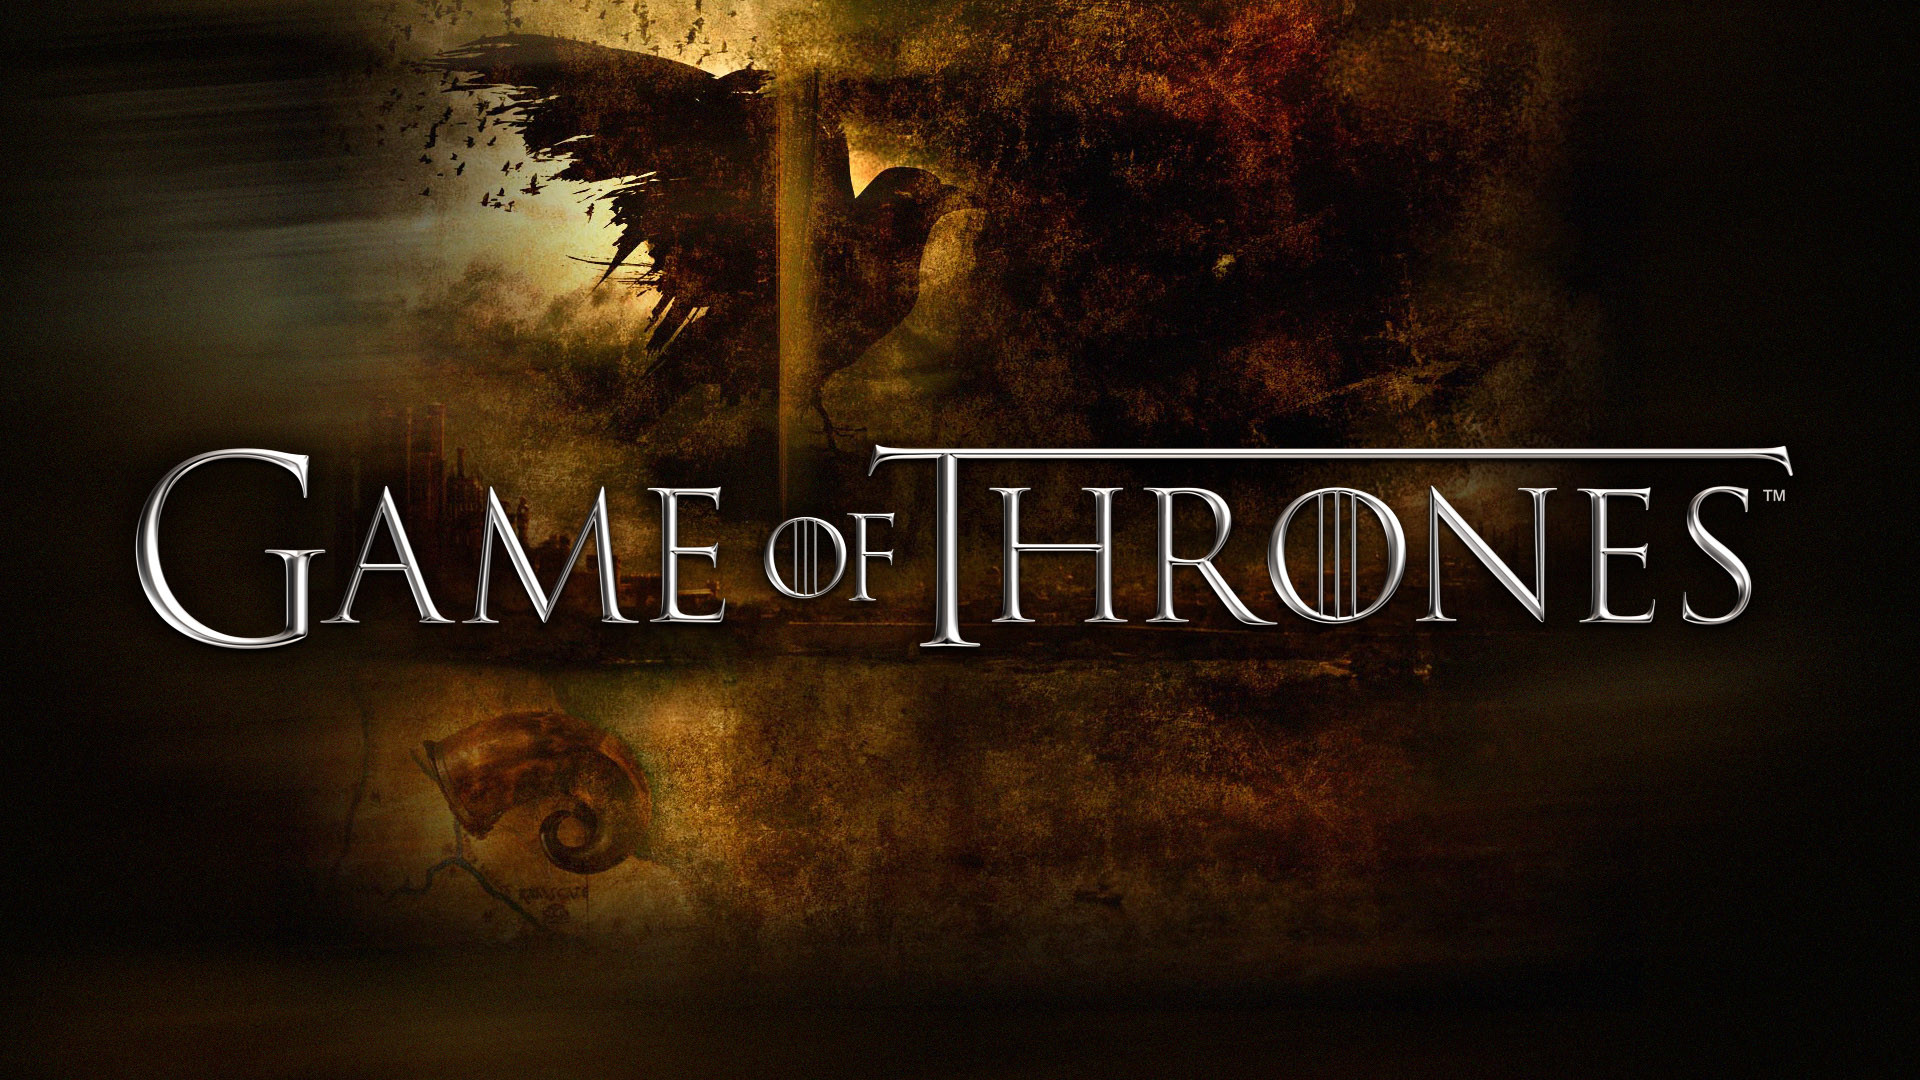 1920x1080 Game of Thrones (HBO SERIES)